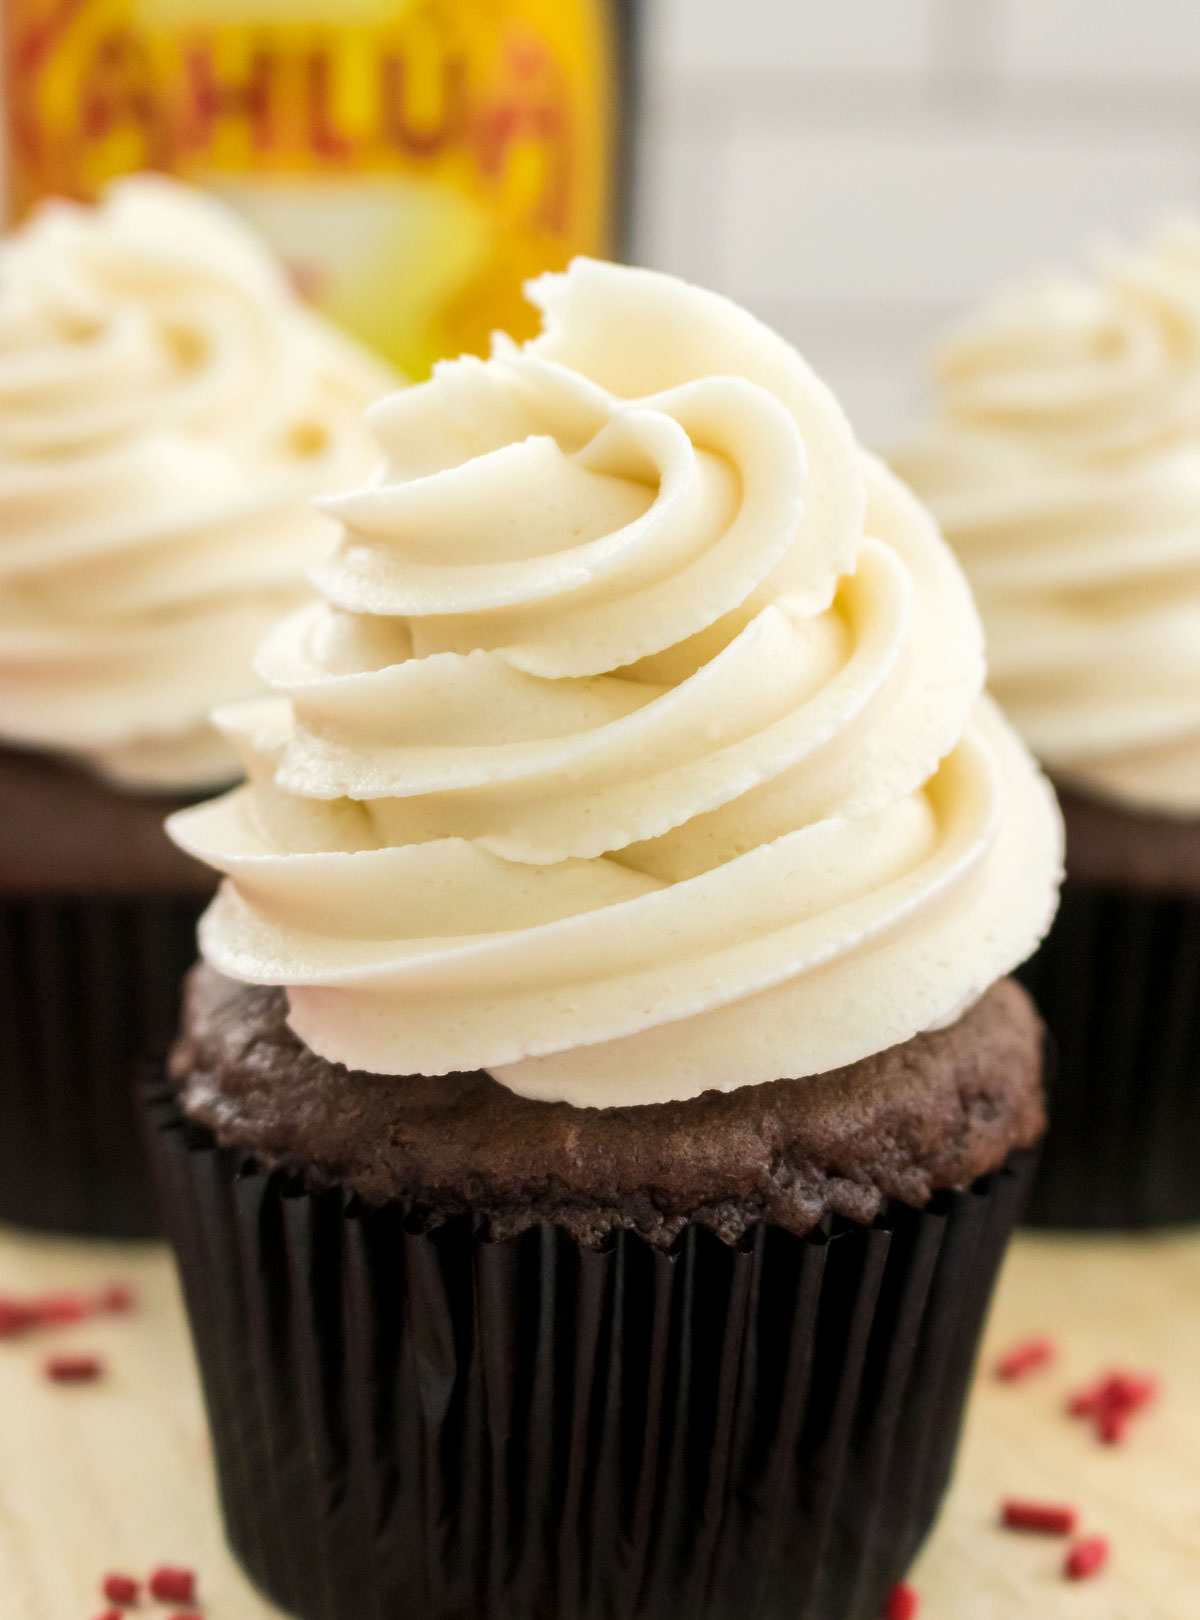 Closeup on a chocolate cupcake frosted with Kahlua Buttercream Frosting sitting on a cutting board in front of a bottle of Kahlua Rum and Coffee Liqueur.